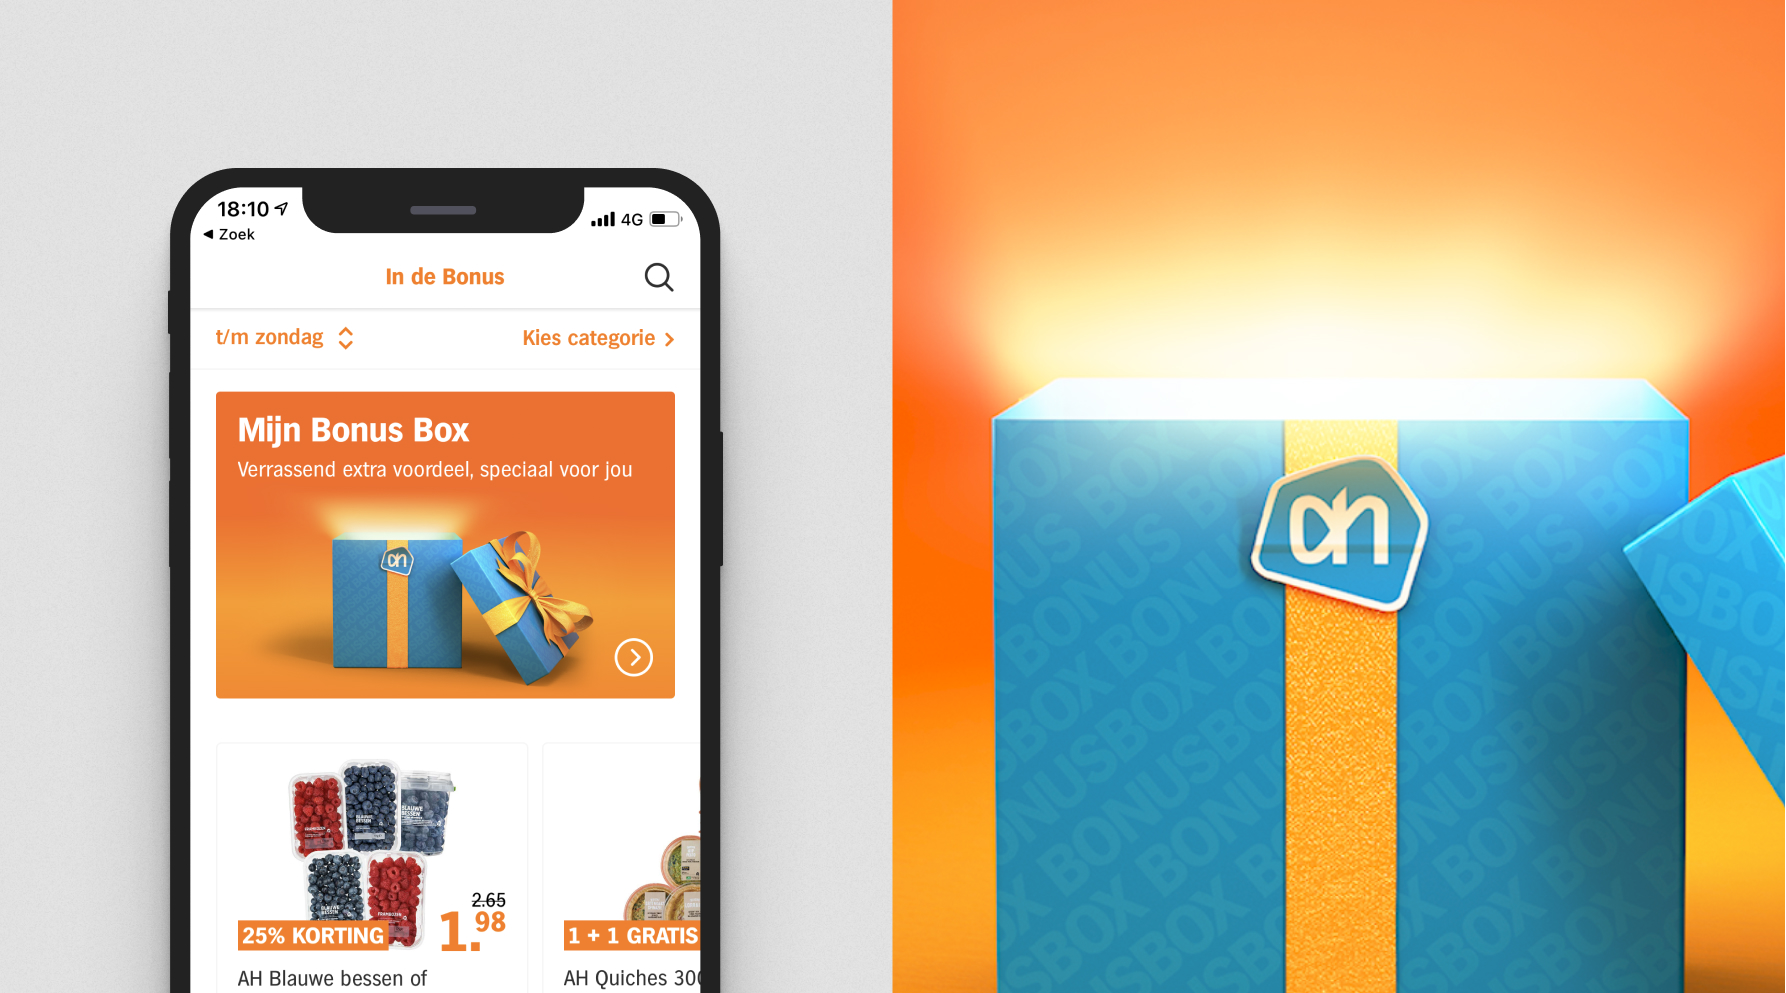 Image of a mobile screen showing the AH app with Bonus Box campaign header and second image of blue opened present that beams light